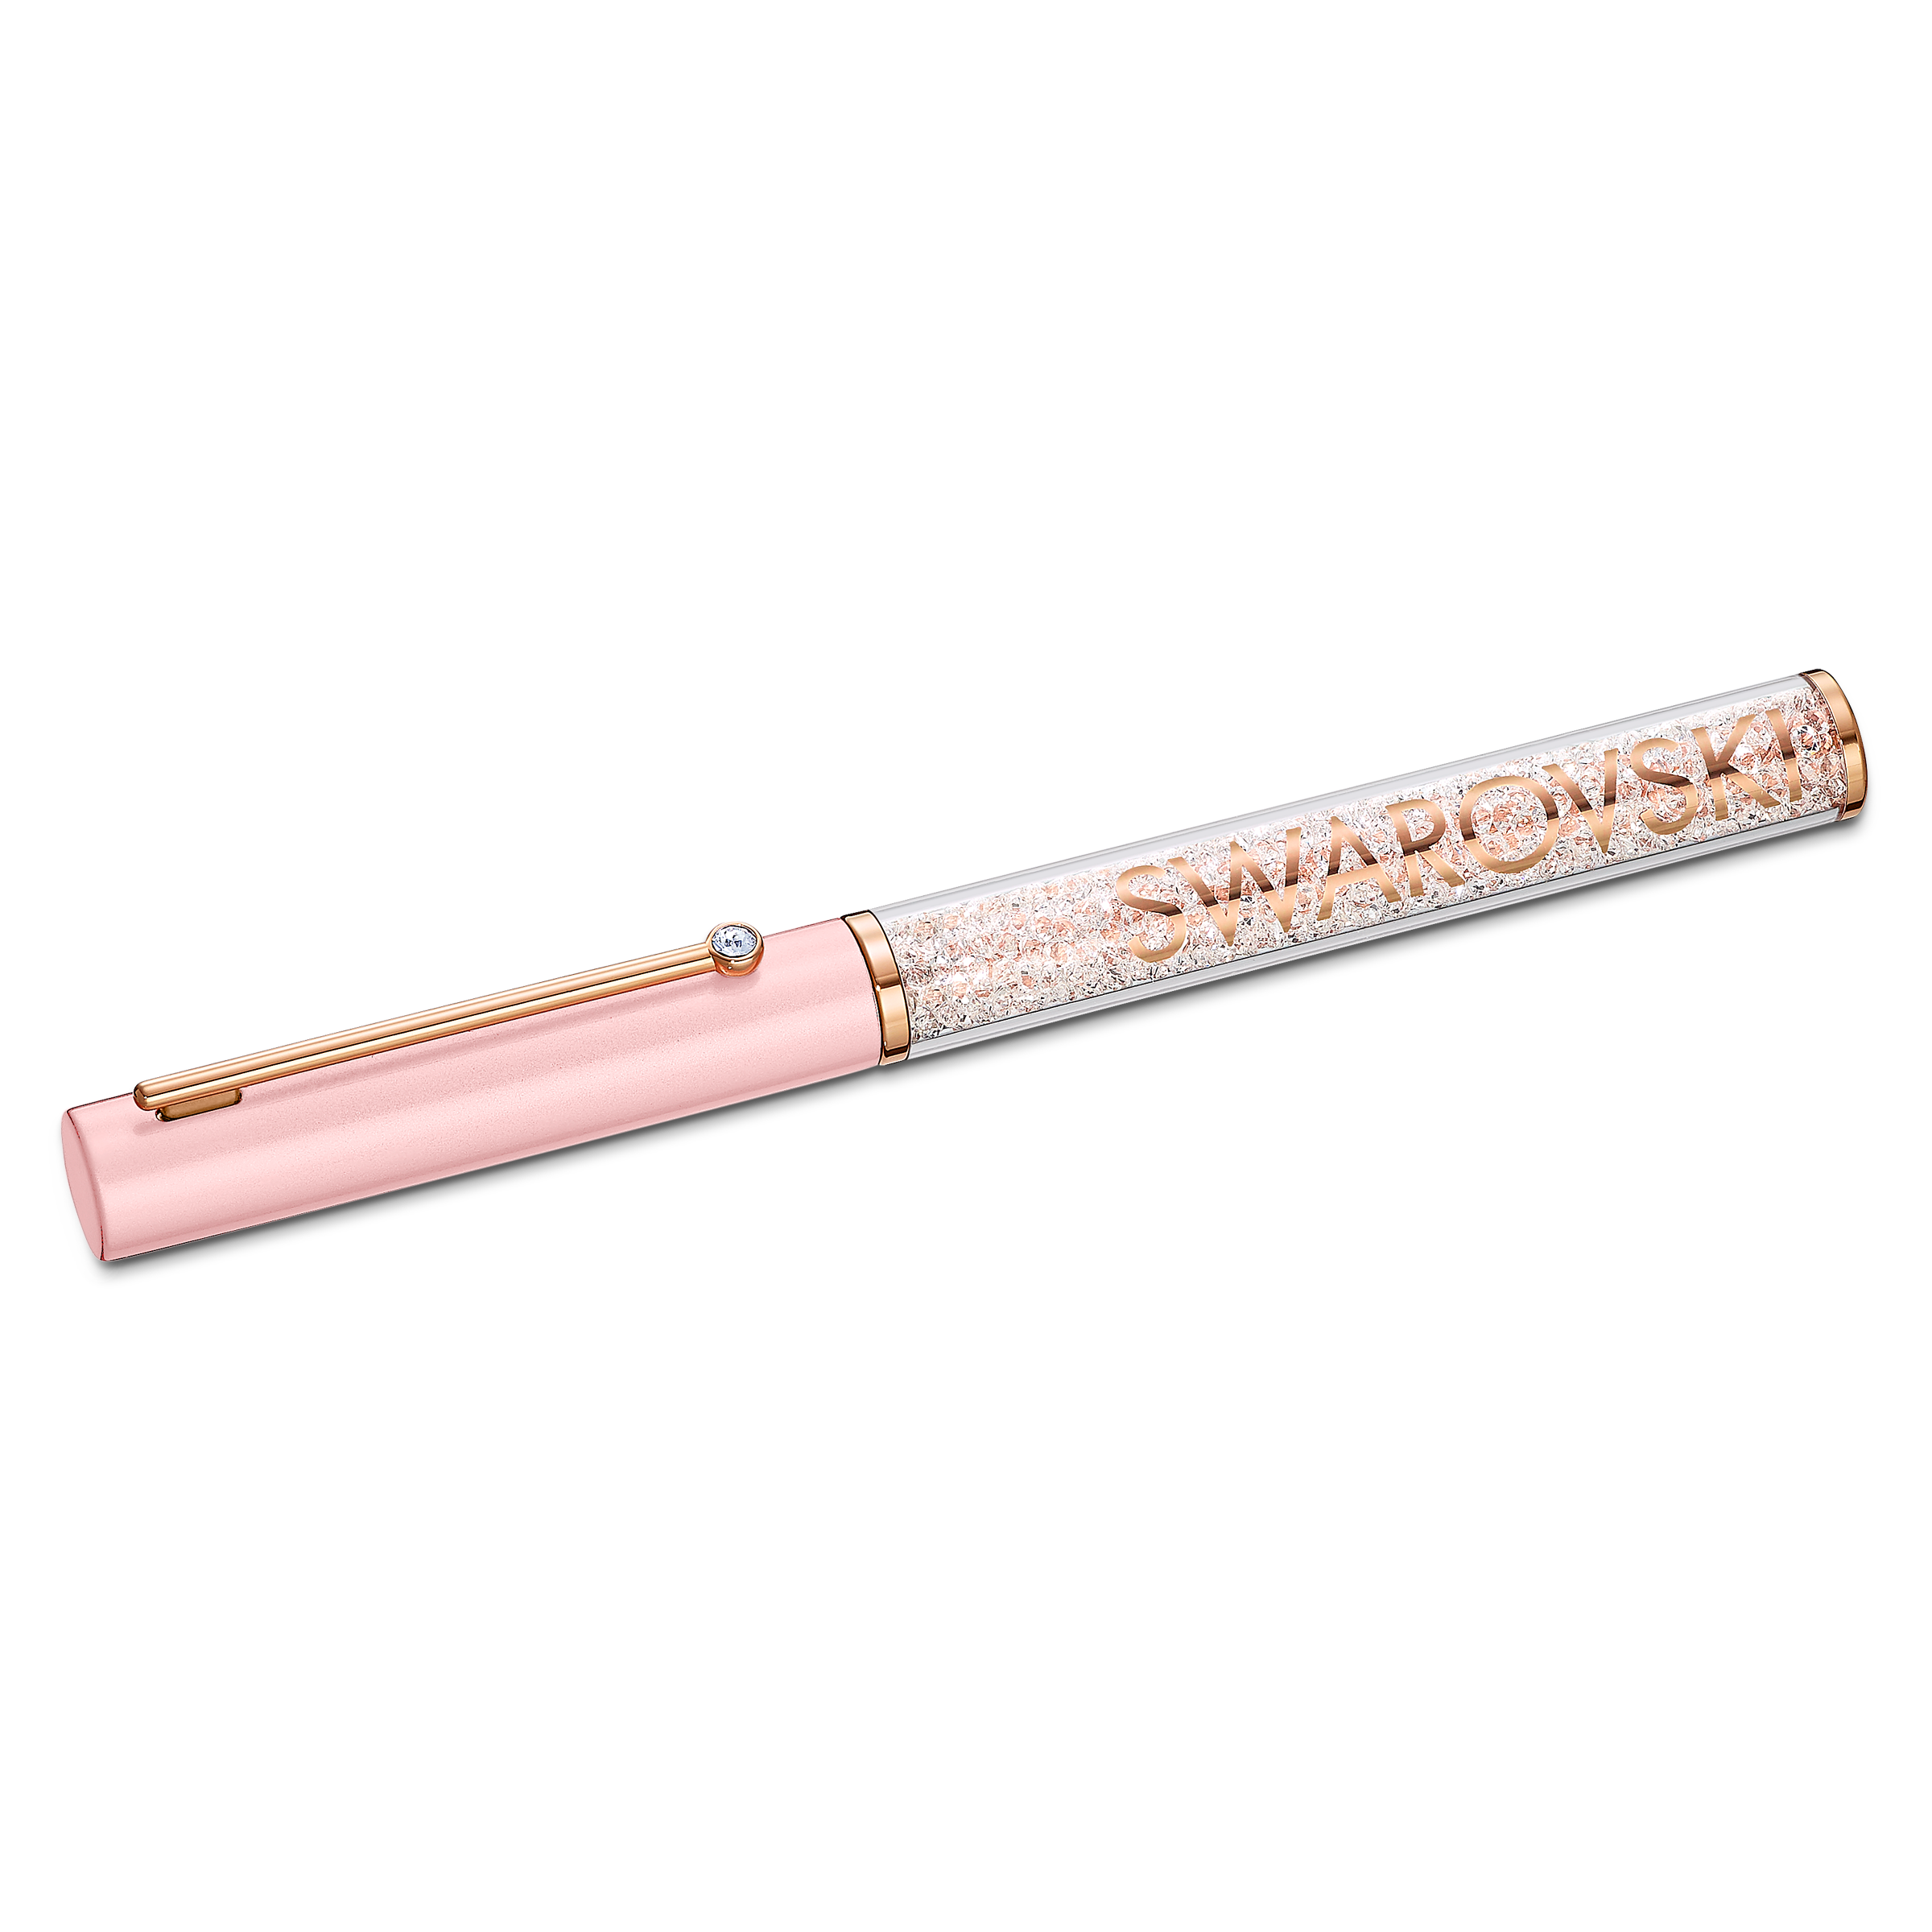 SWAROVSKI CRYSTALLINE GLOSS BALLPOINT PEN, PINK, PINK LACQUERED, ROSE GOLD-TONE PLATED 5568756